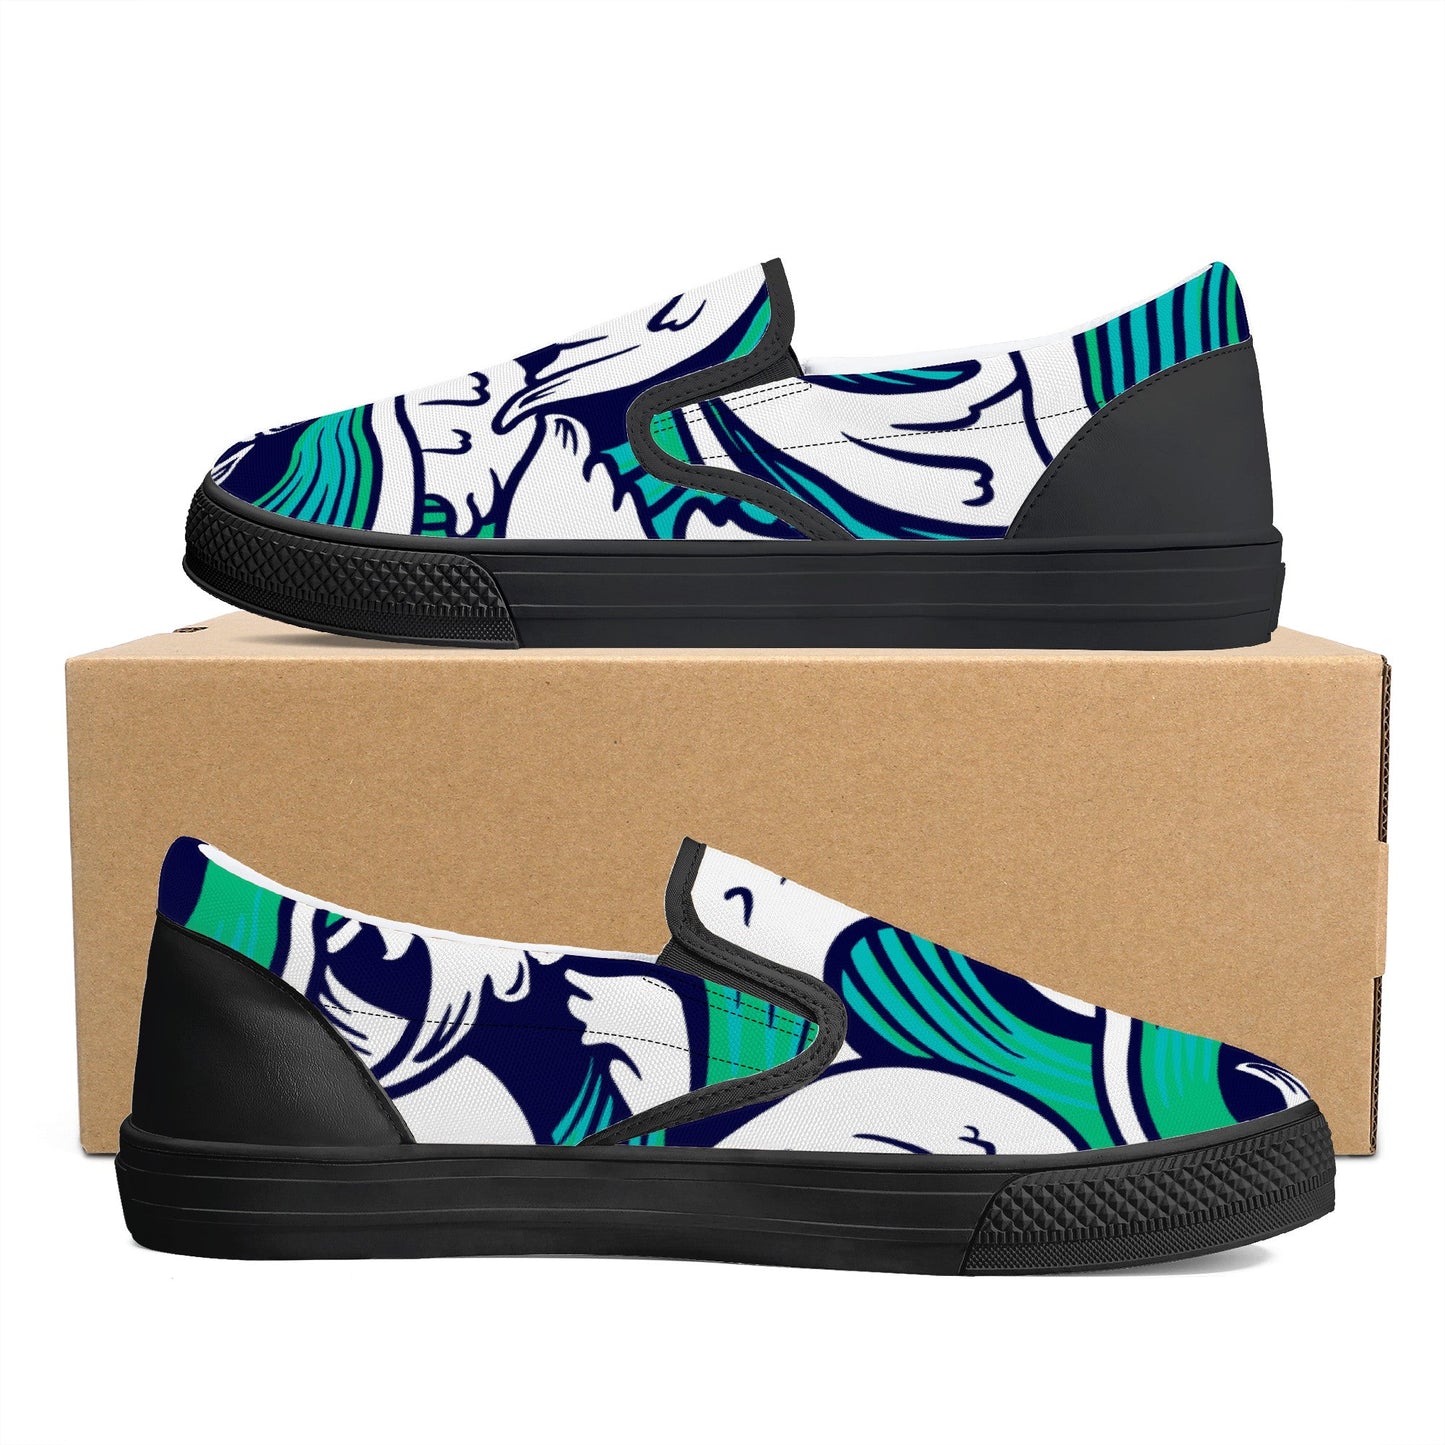 OCEAN WAVE Slip-on Shoes | CANAANWEAR | Shoes | slip on shoes